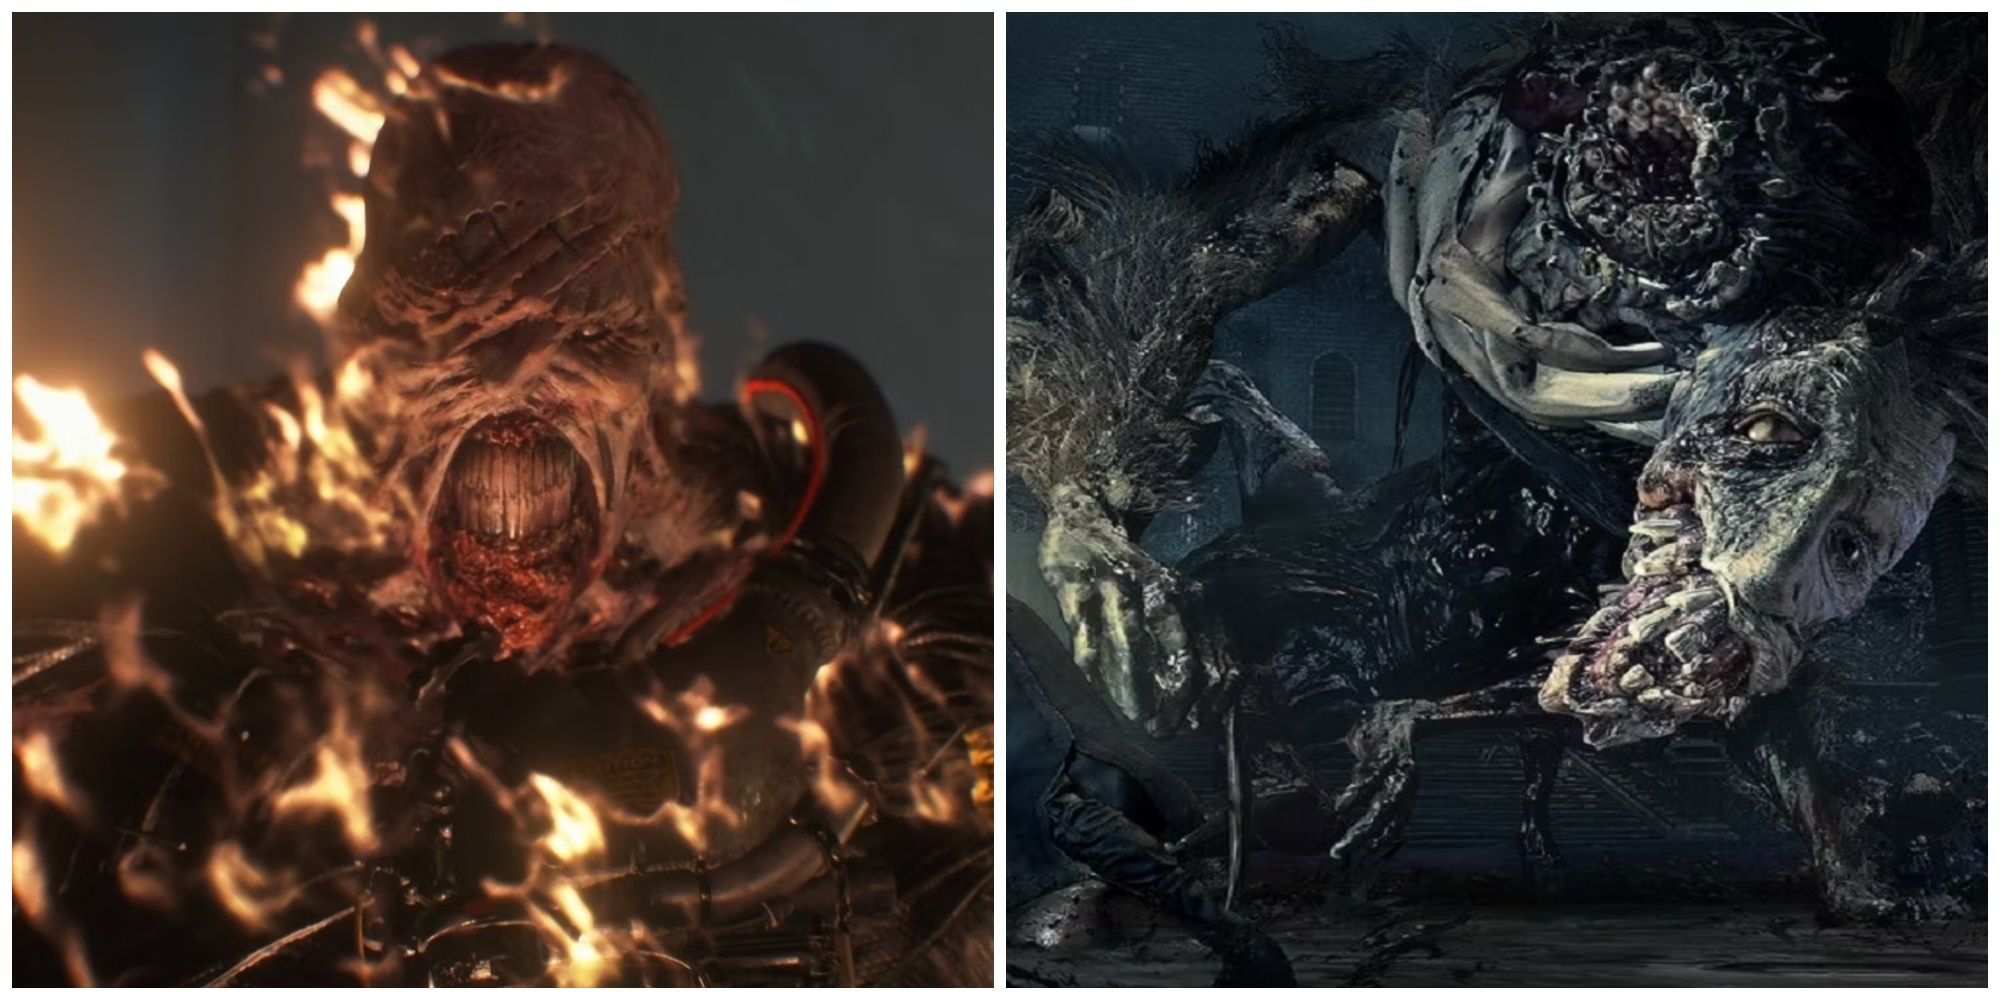 Nemesis in Resident Evil 3 and Ludwig in Bloodborne